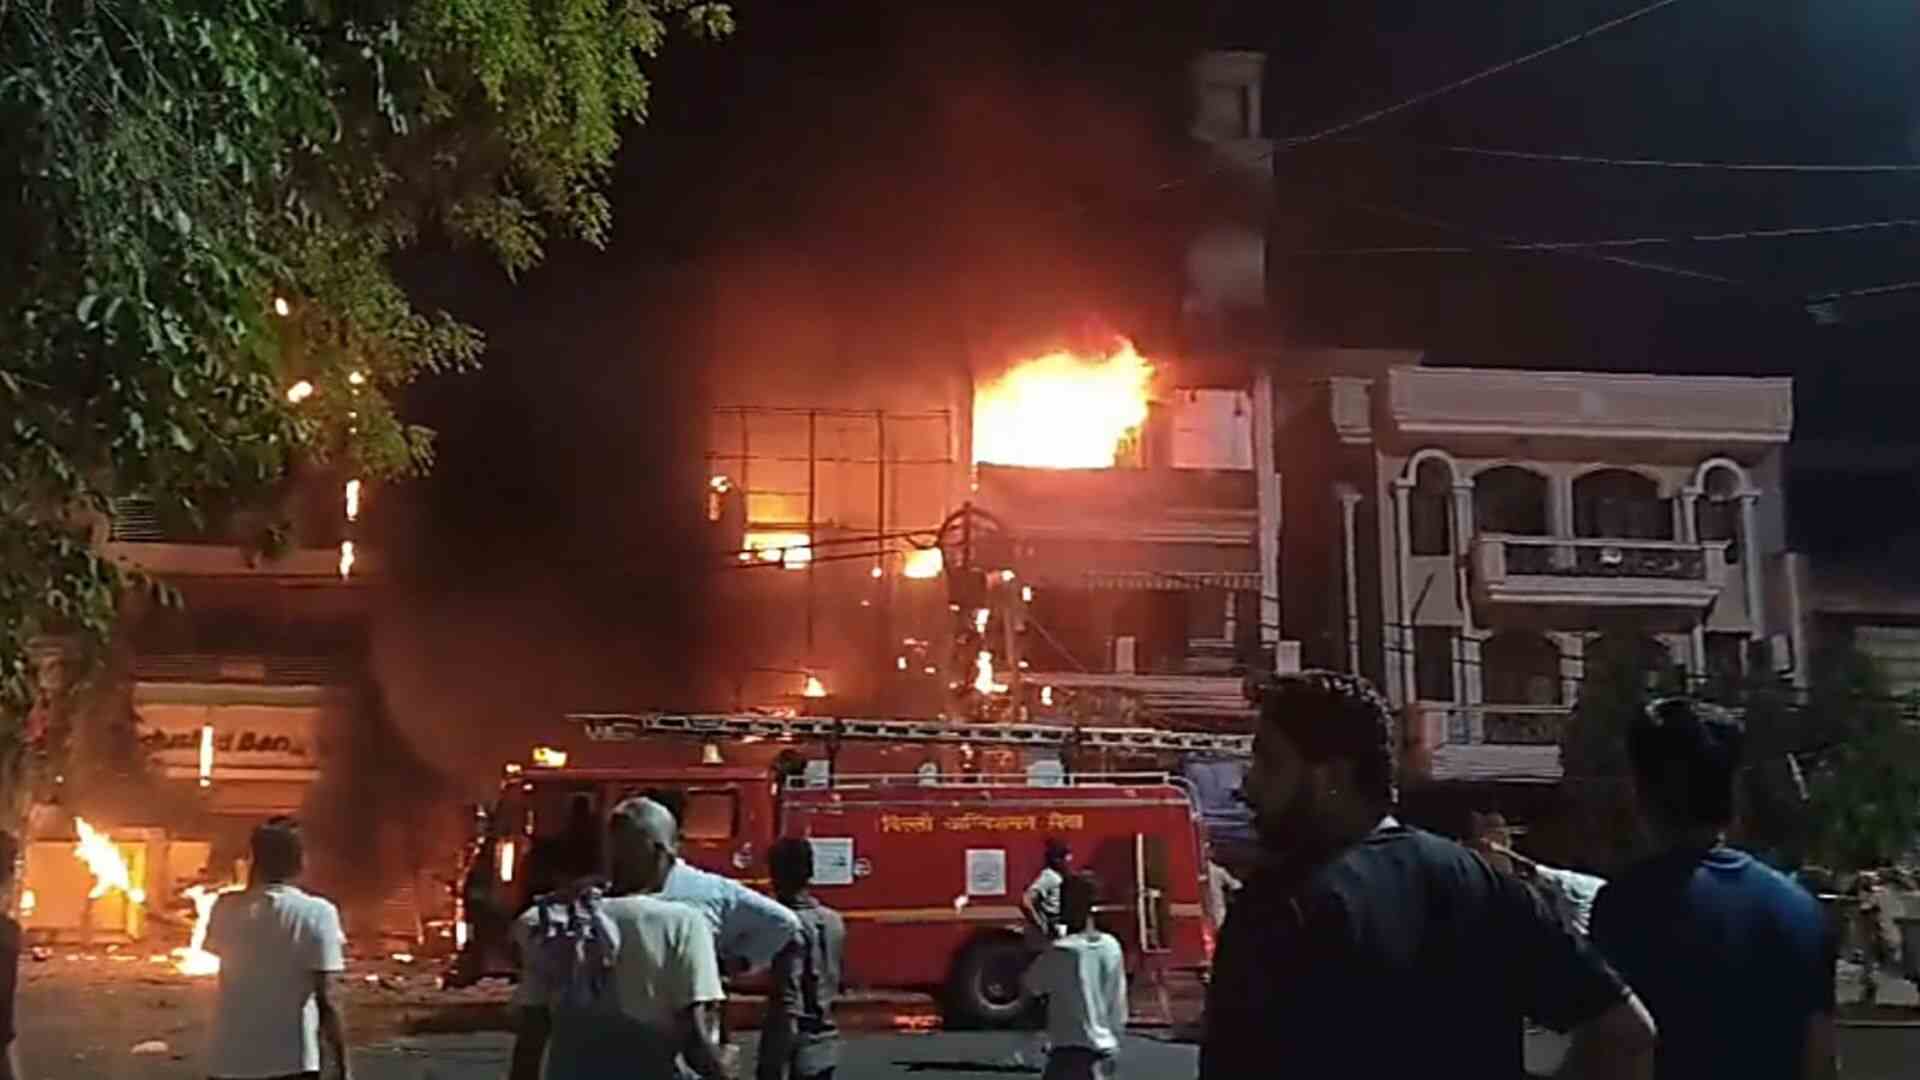 “Most Likely, The Building Had No NOC,” Says Director Of Delhi Fire Department On Hospital Fire